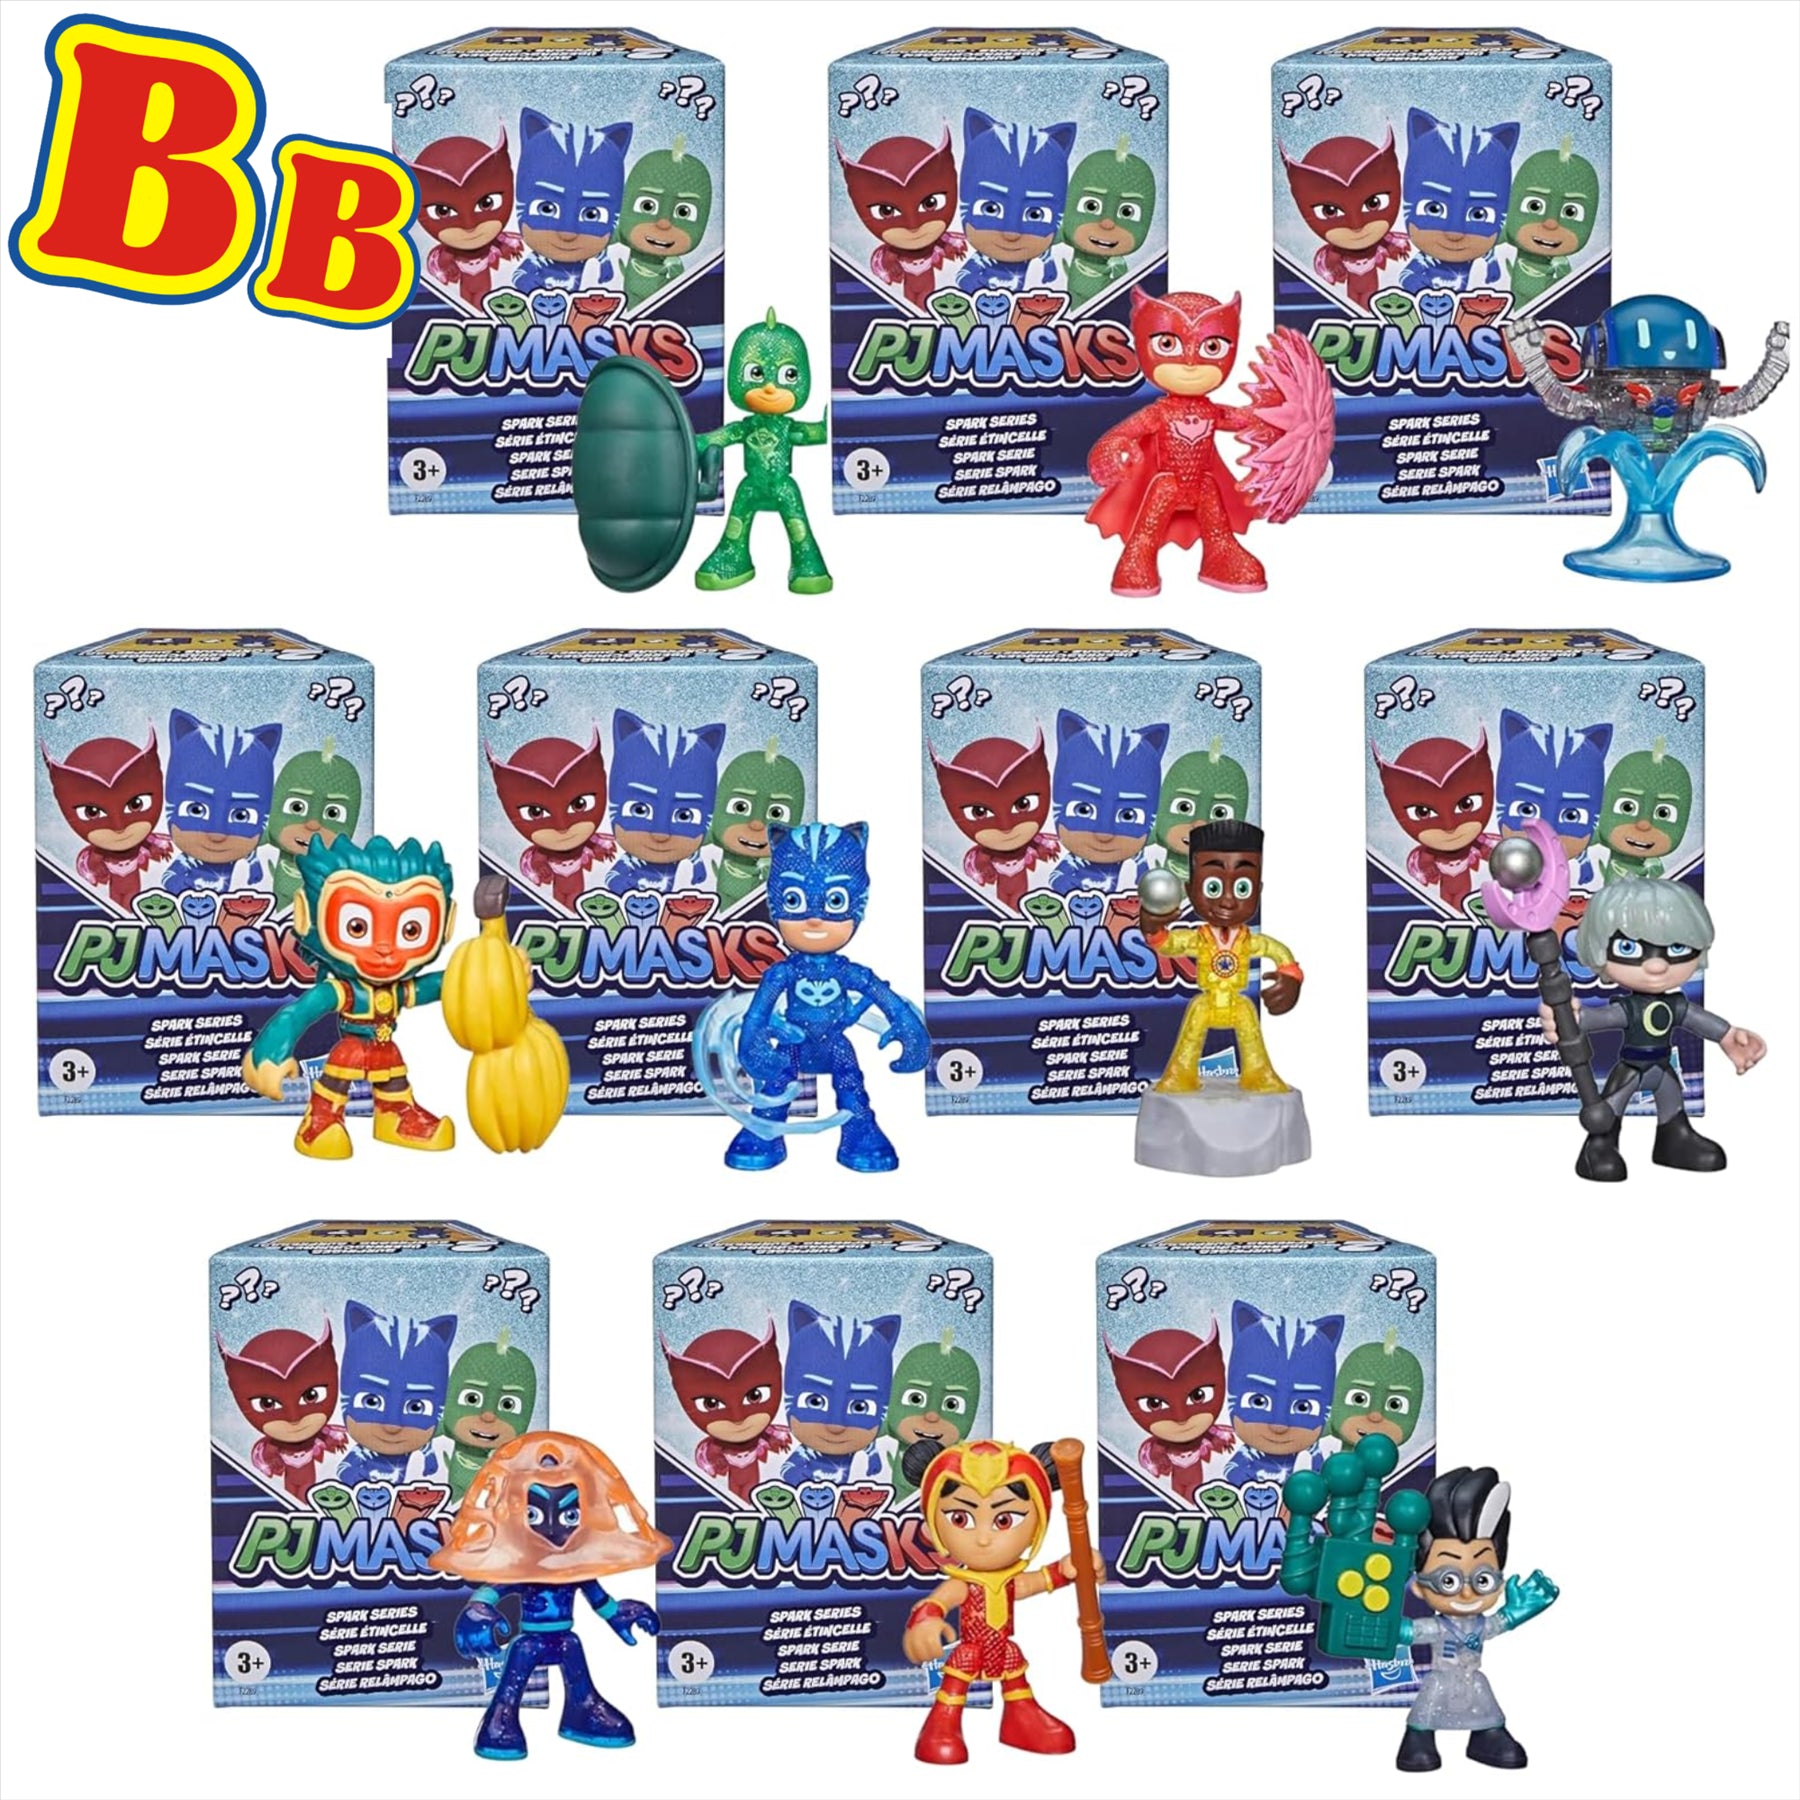 PJ Masks Articulated Play Figures and Accessories Blind Box Sets - Complete Set of 10 Spark Series - Toptoys2u